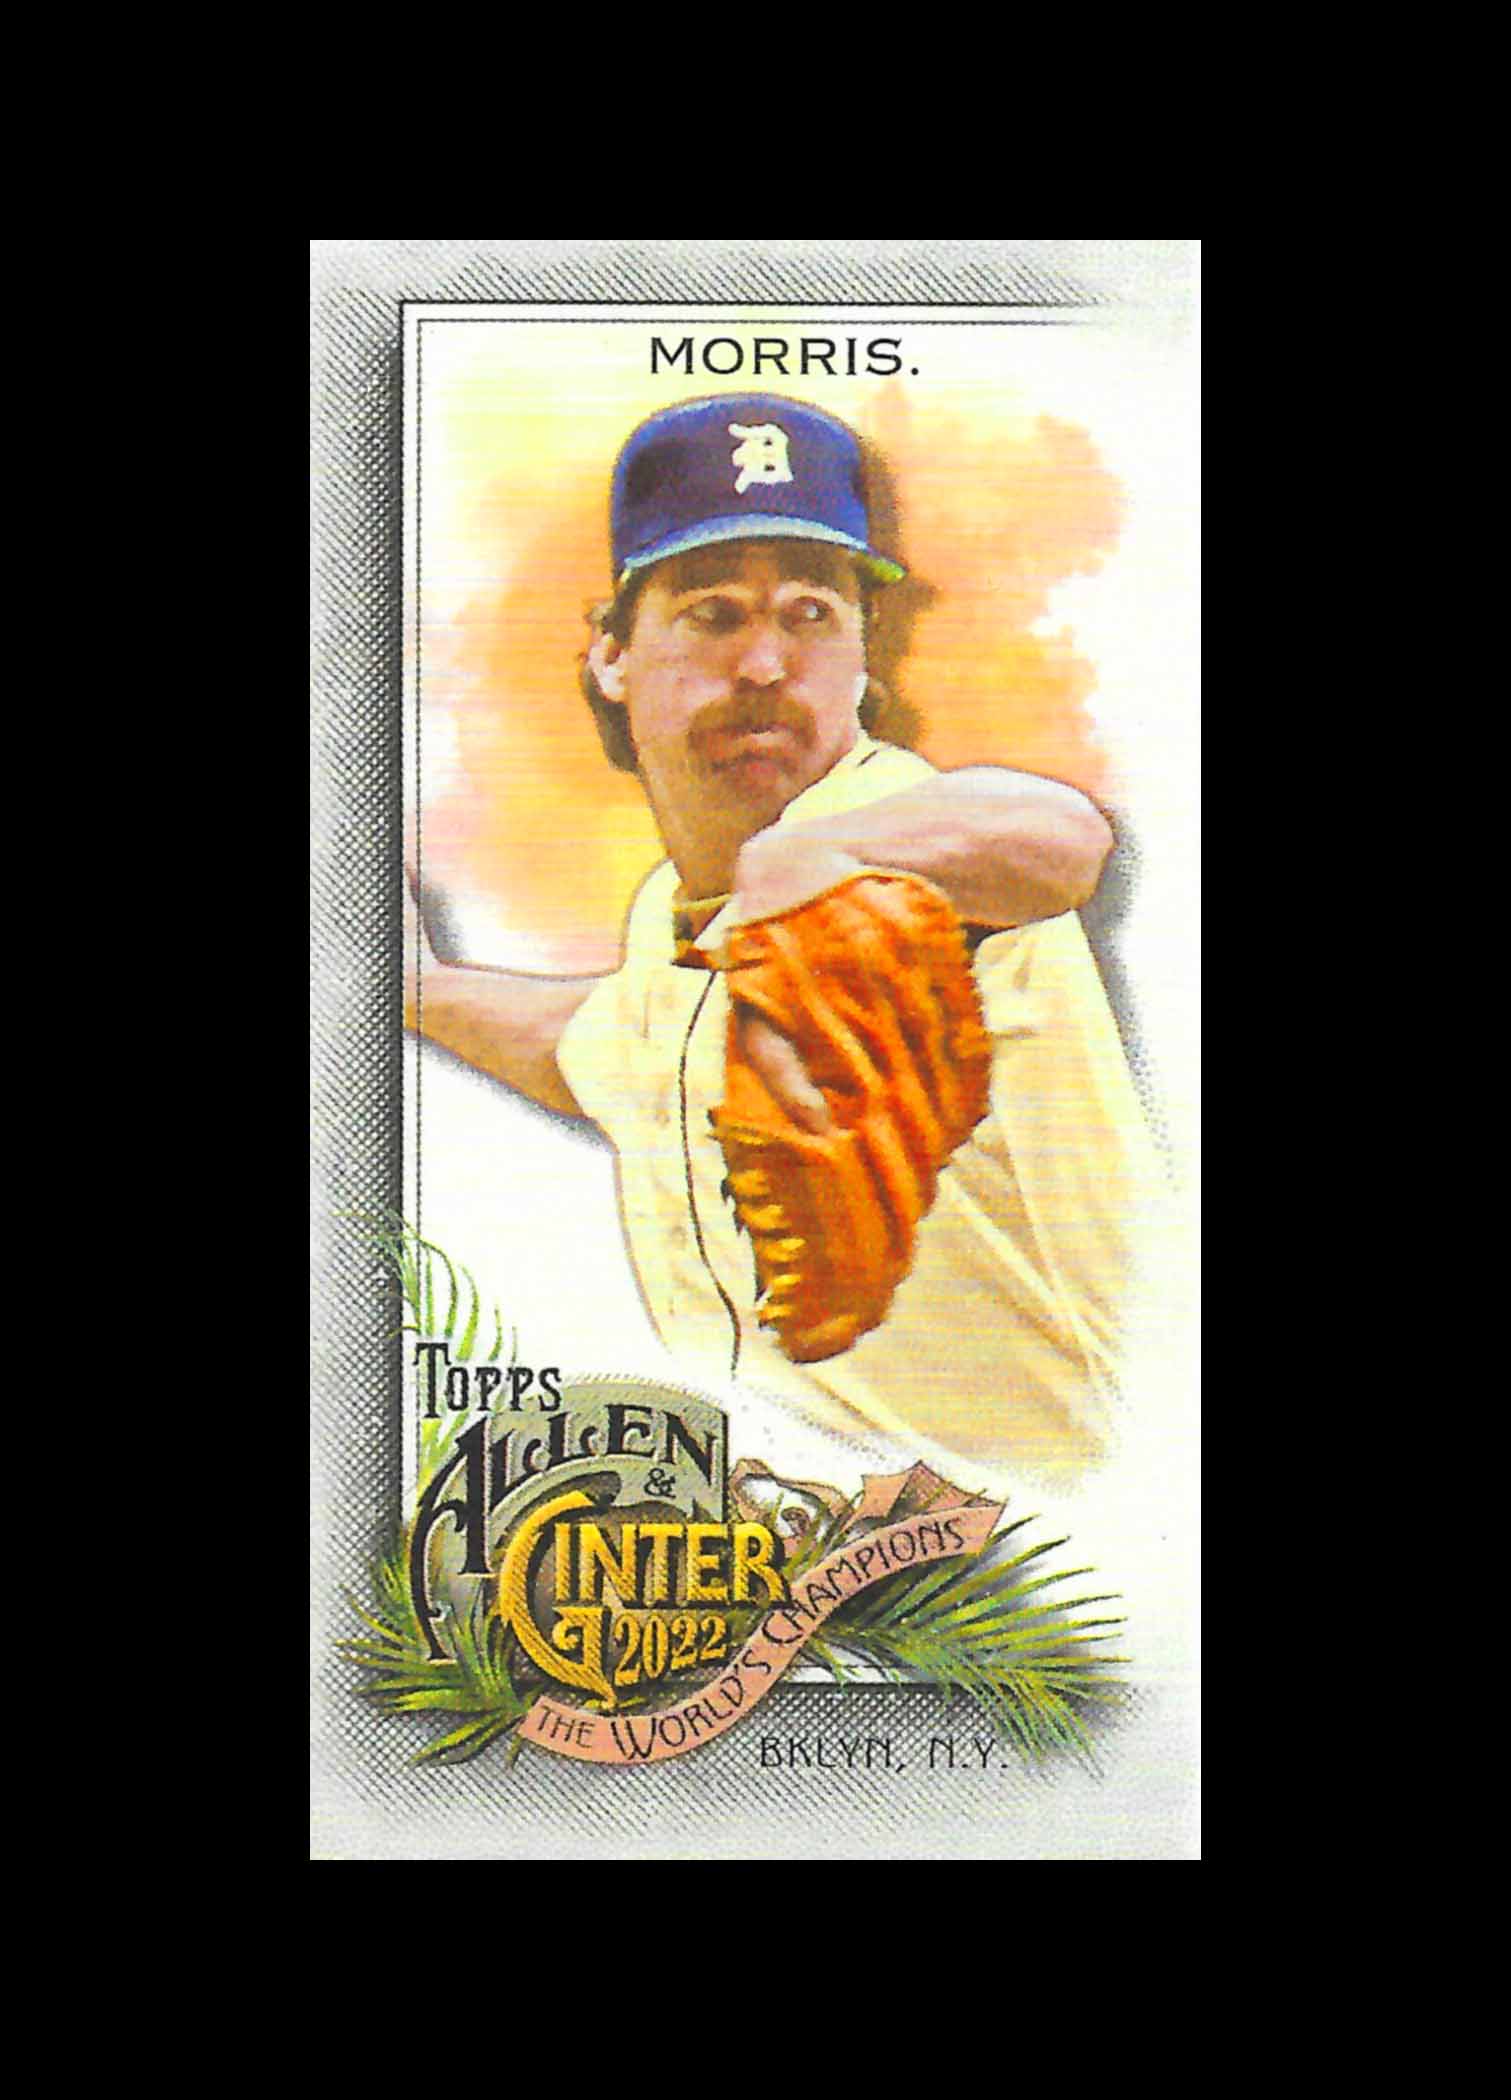 2022 Topps Allen and Ginter Mini